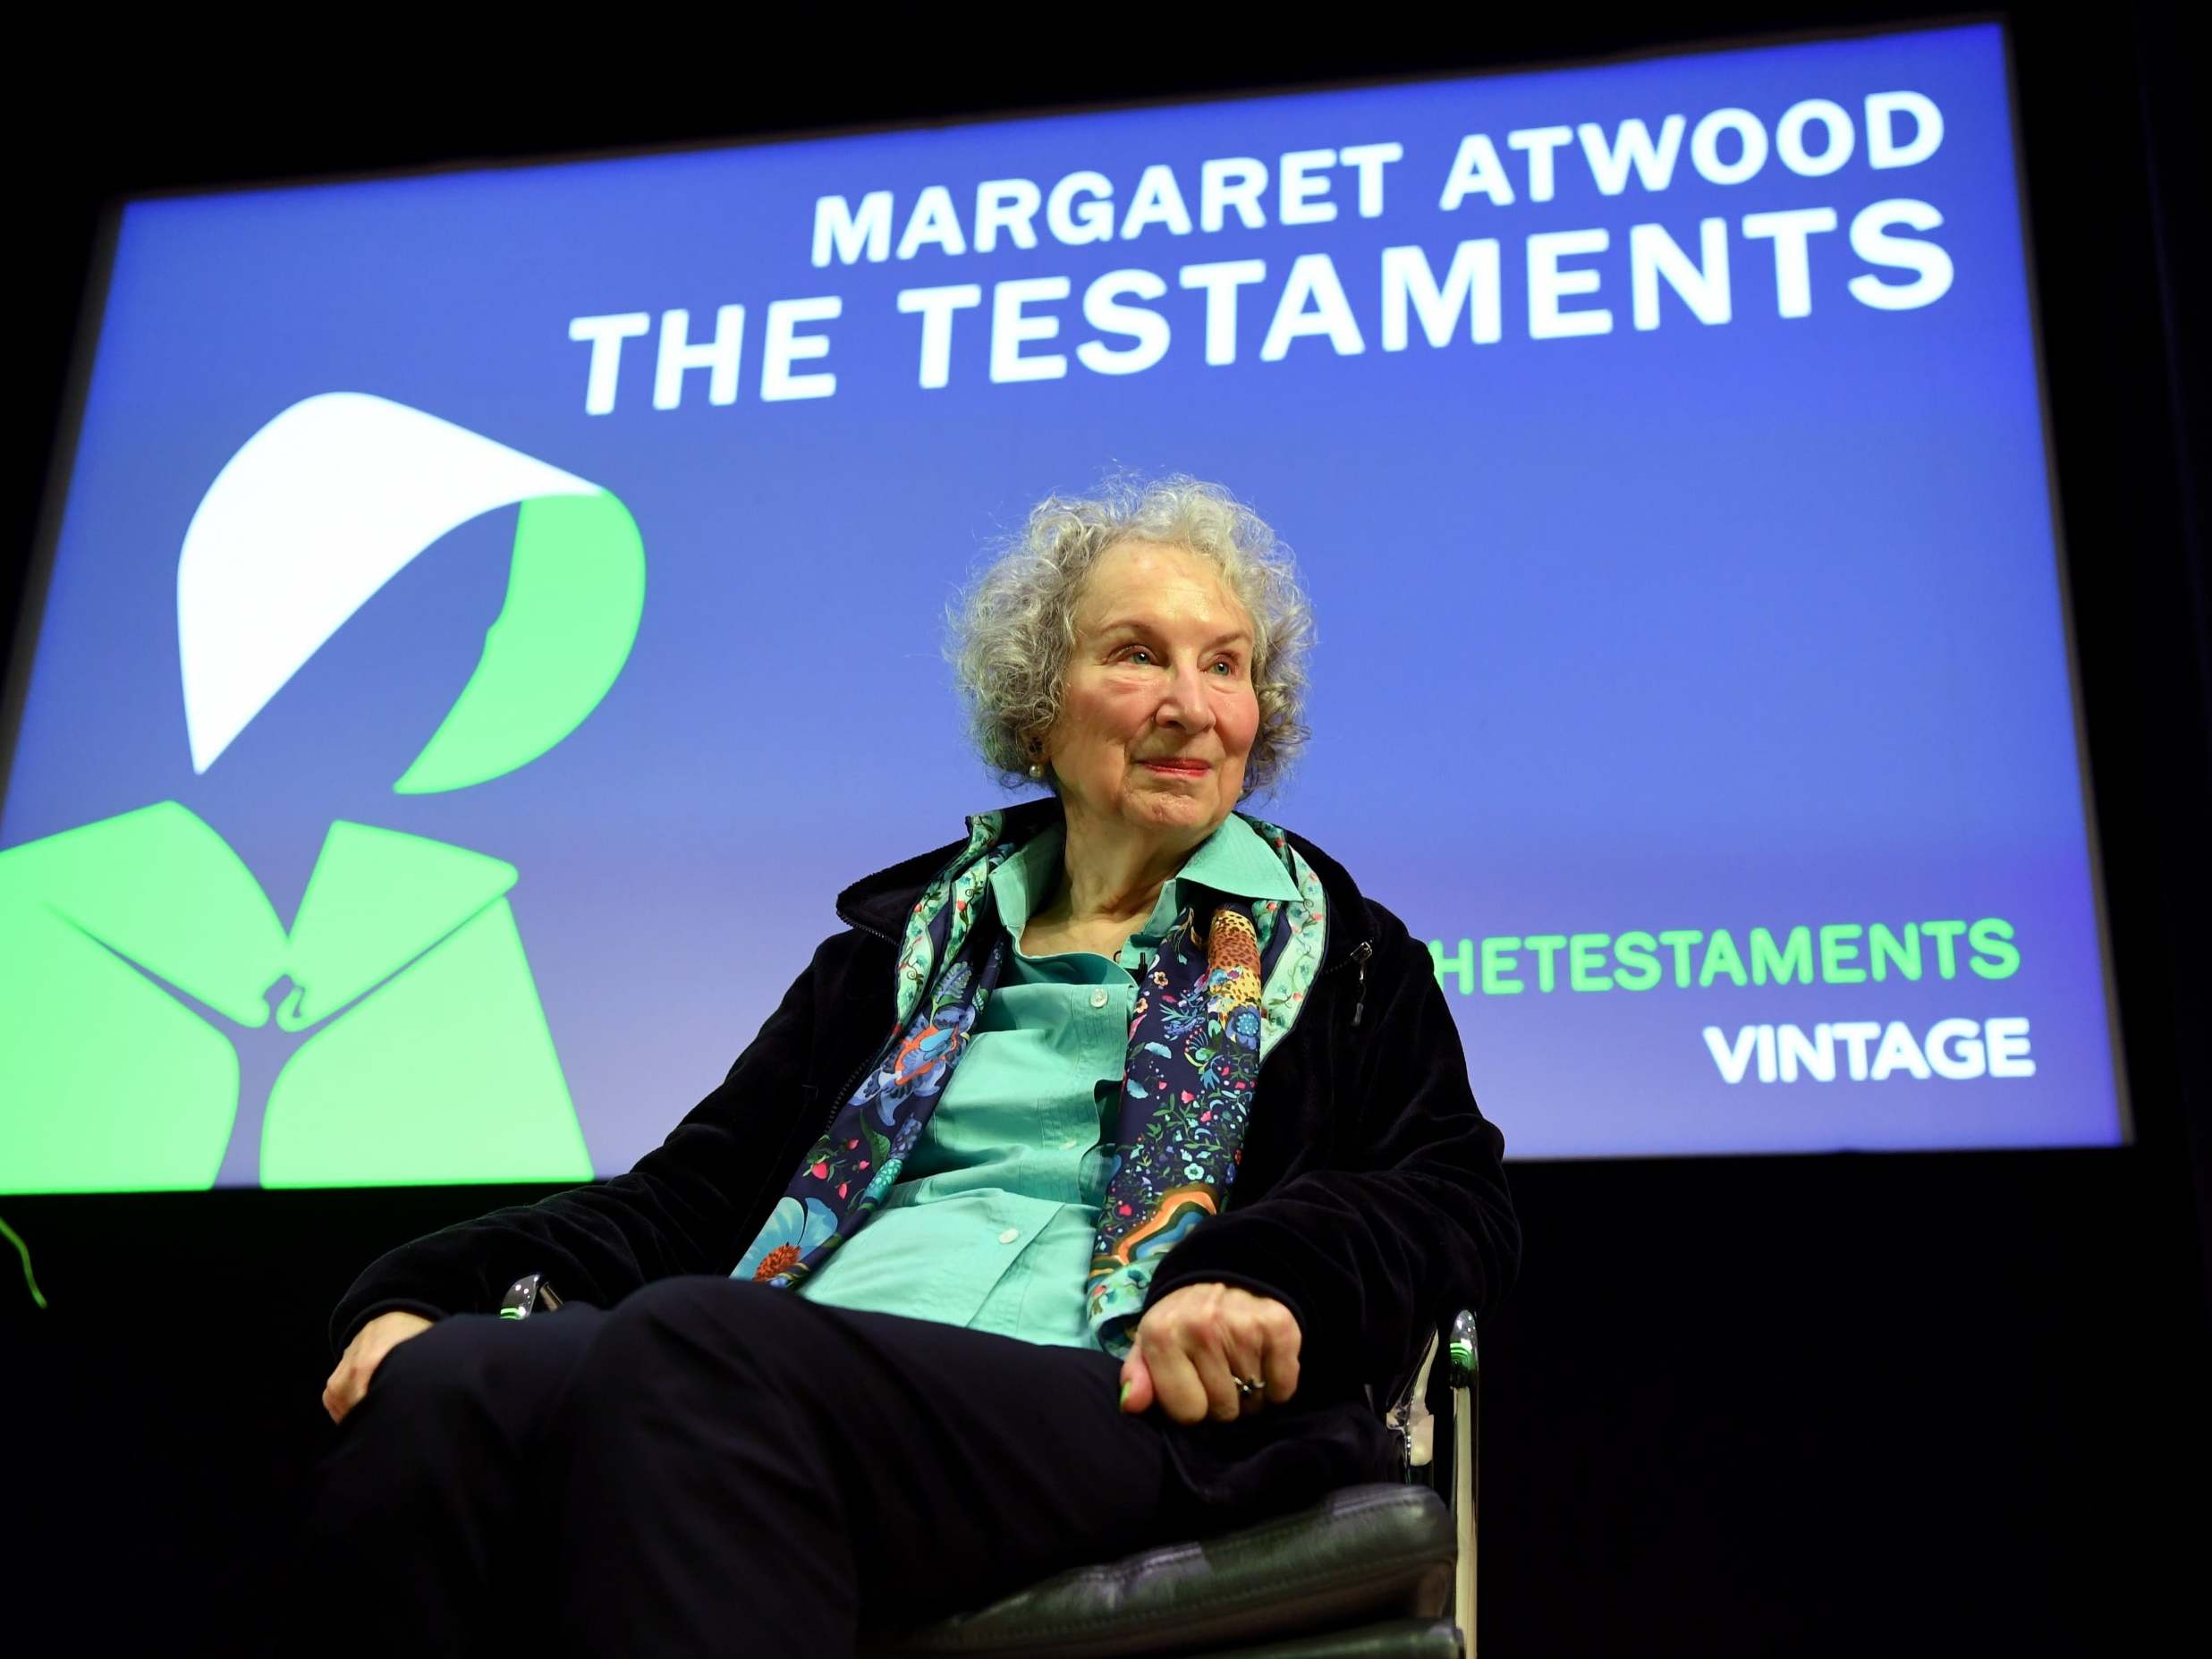 ‘The Testaments’ sparked worldwide excitement and is already nominated for the Booker Prize